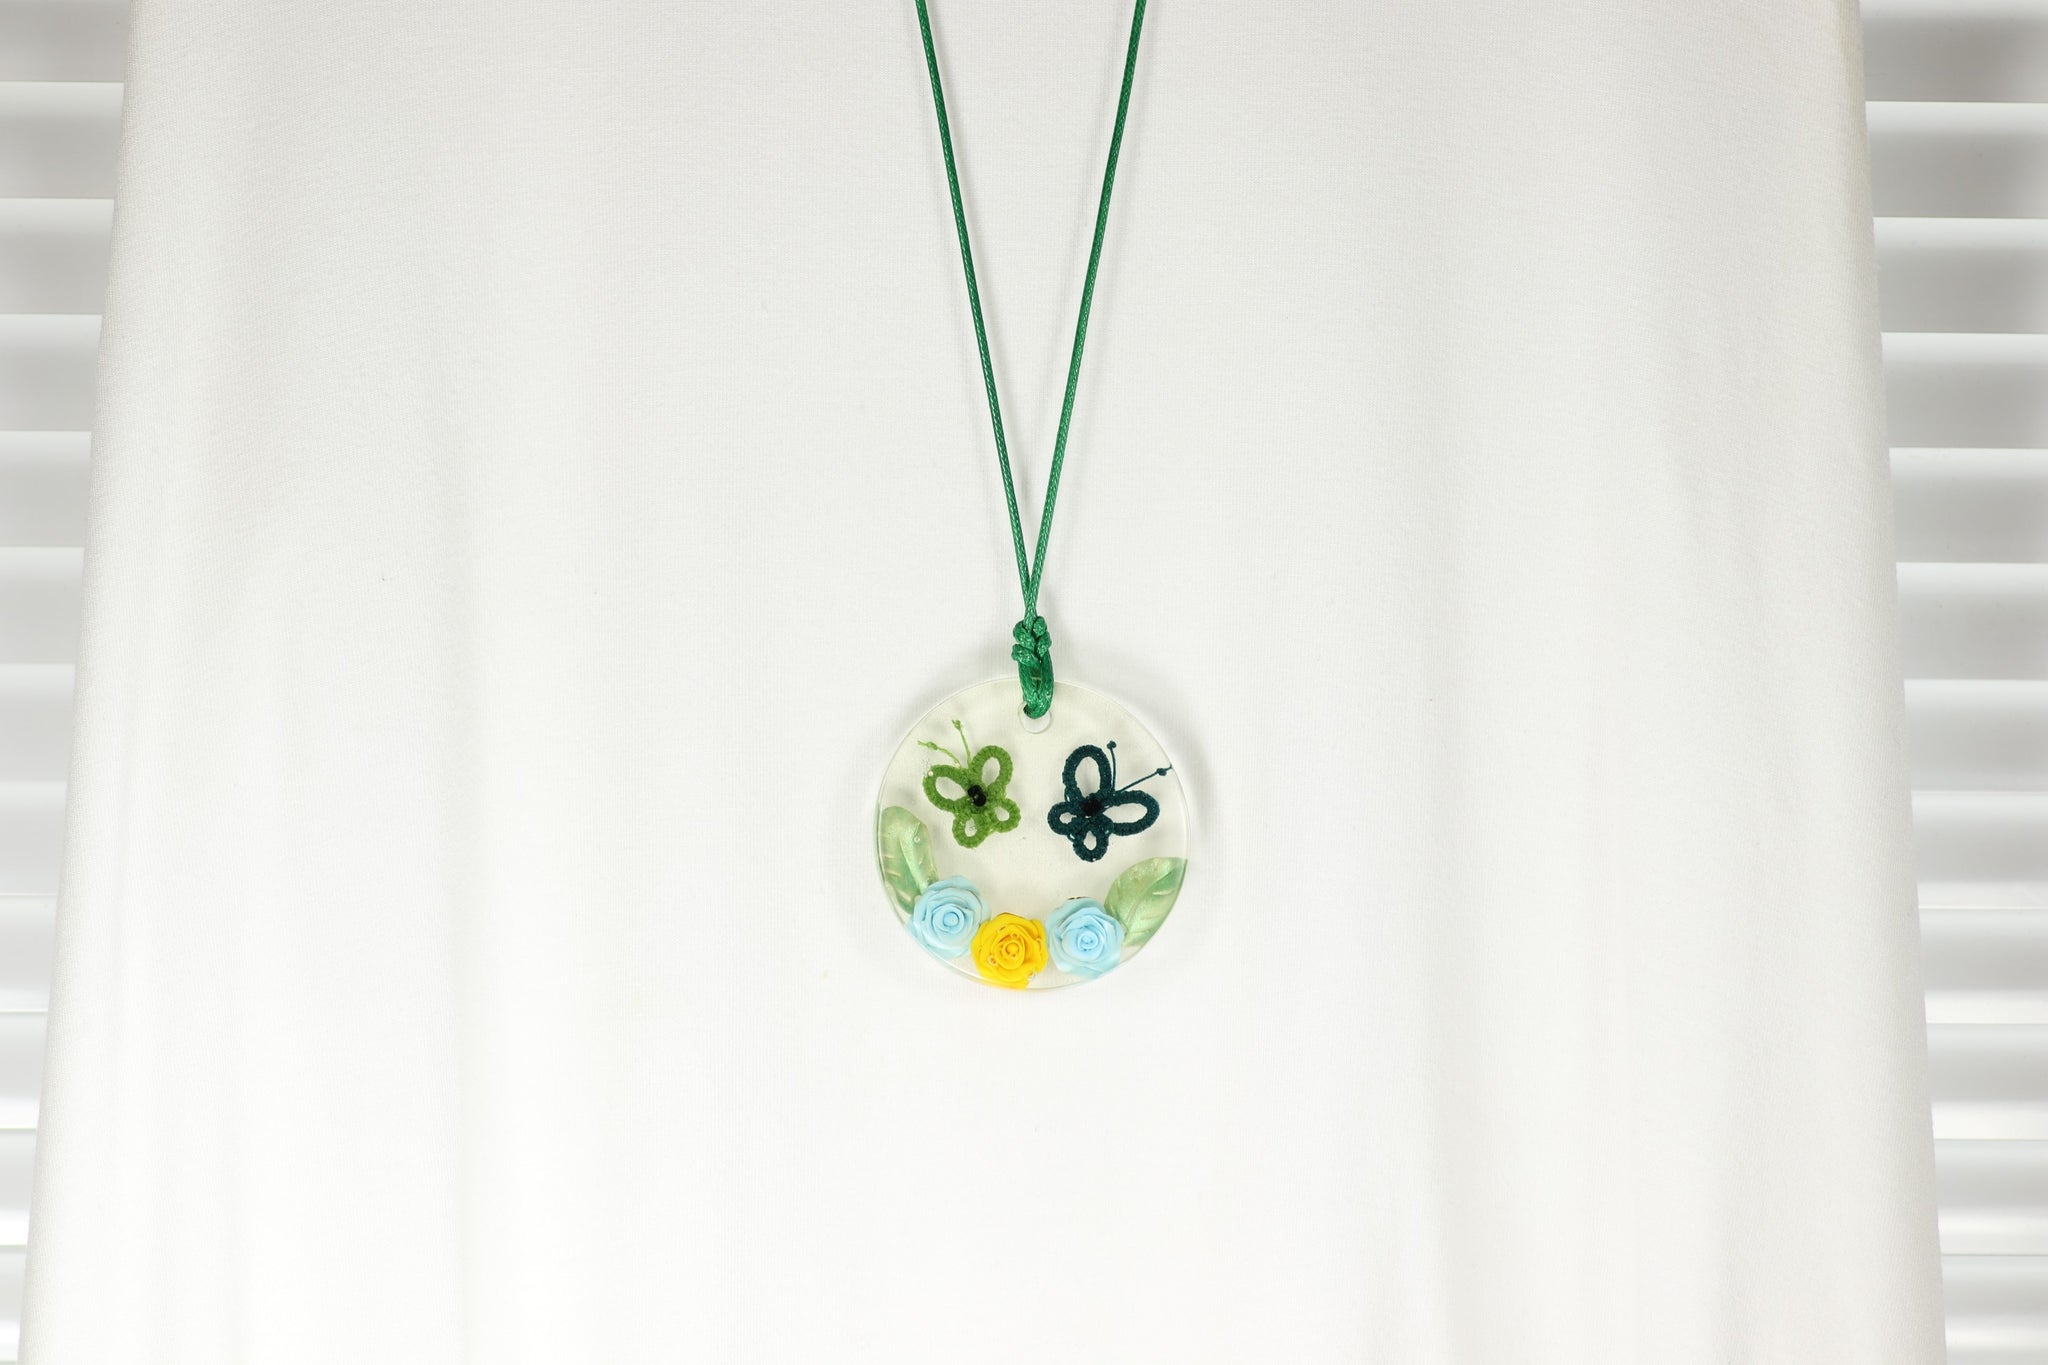 ROUND PENDANT GREEN BUTTERFLY ON YELLOW BLUE ROSES